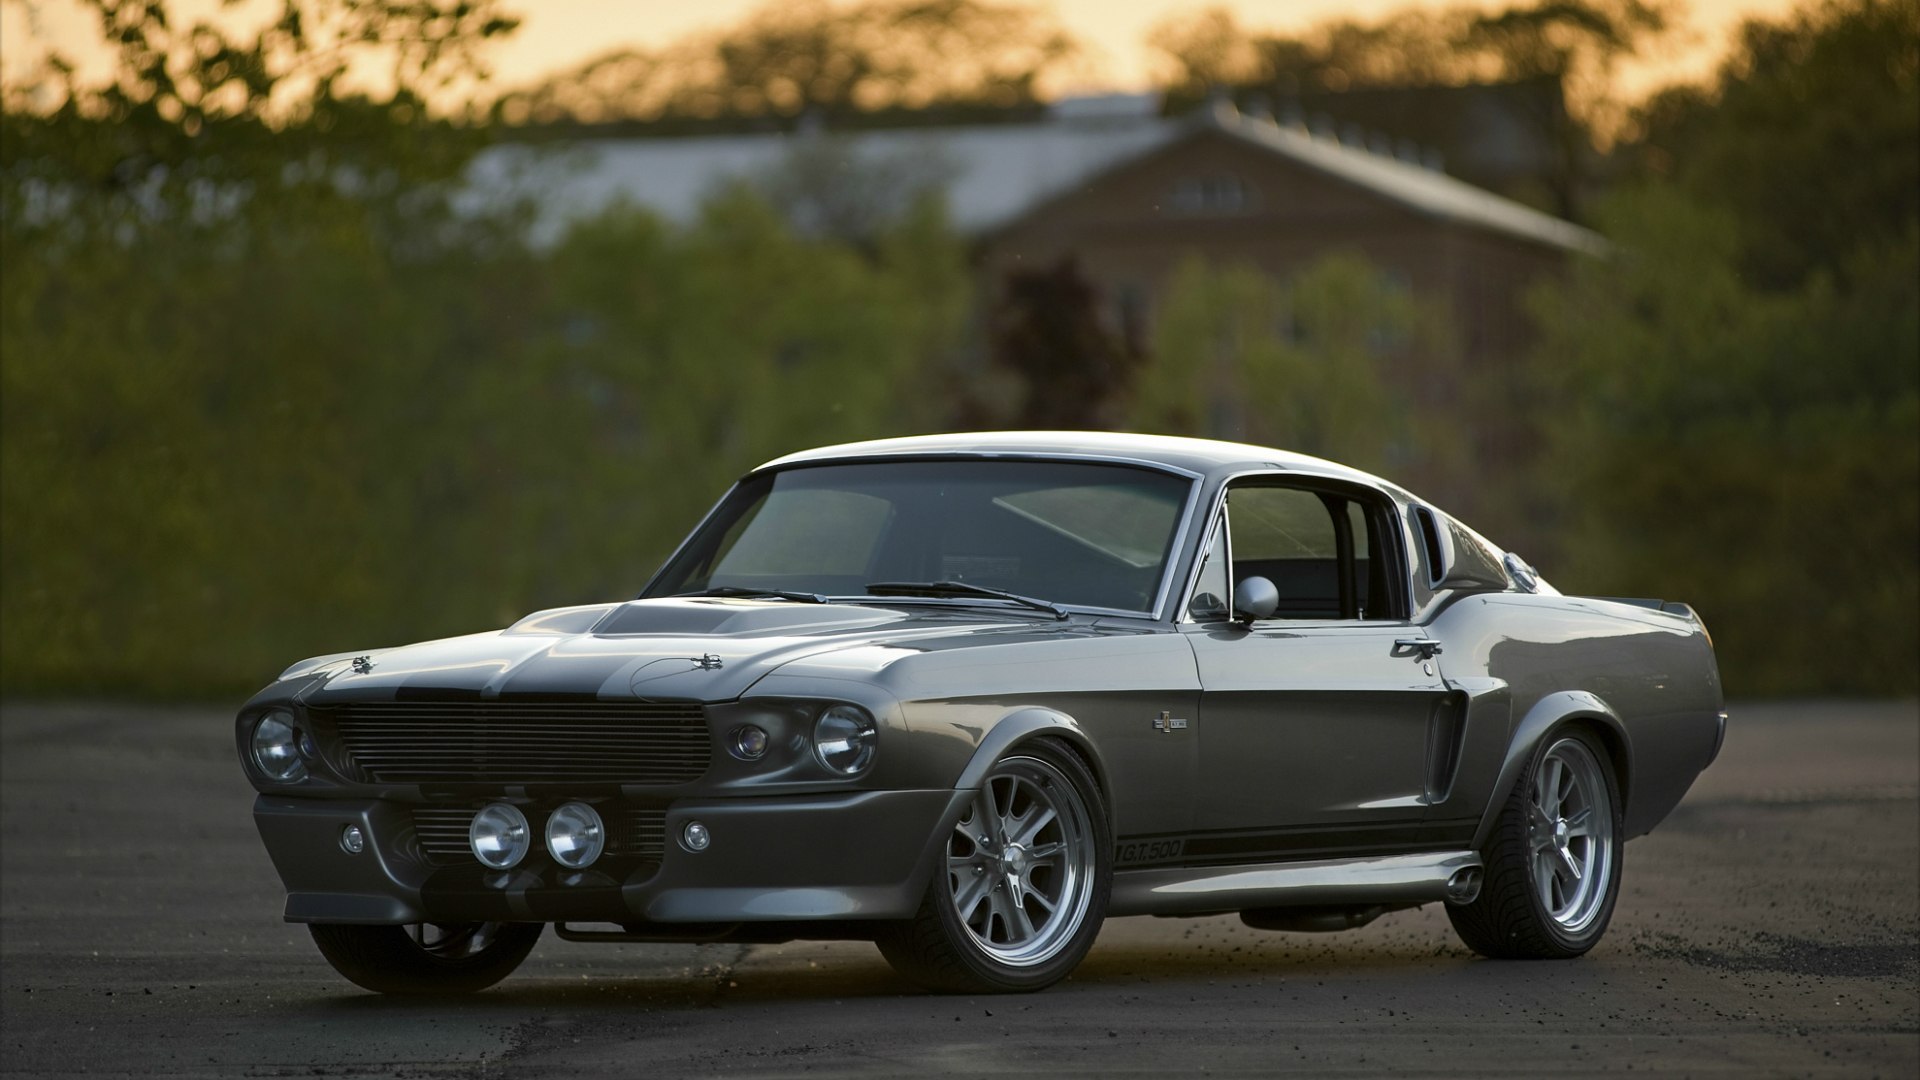 Wallpaper Shelby Gt Eleanor Car Pictures And Photos Ford